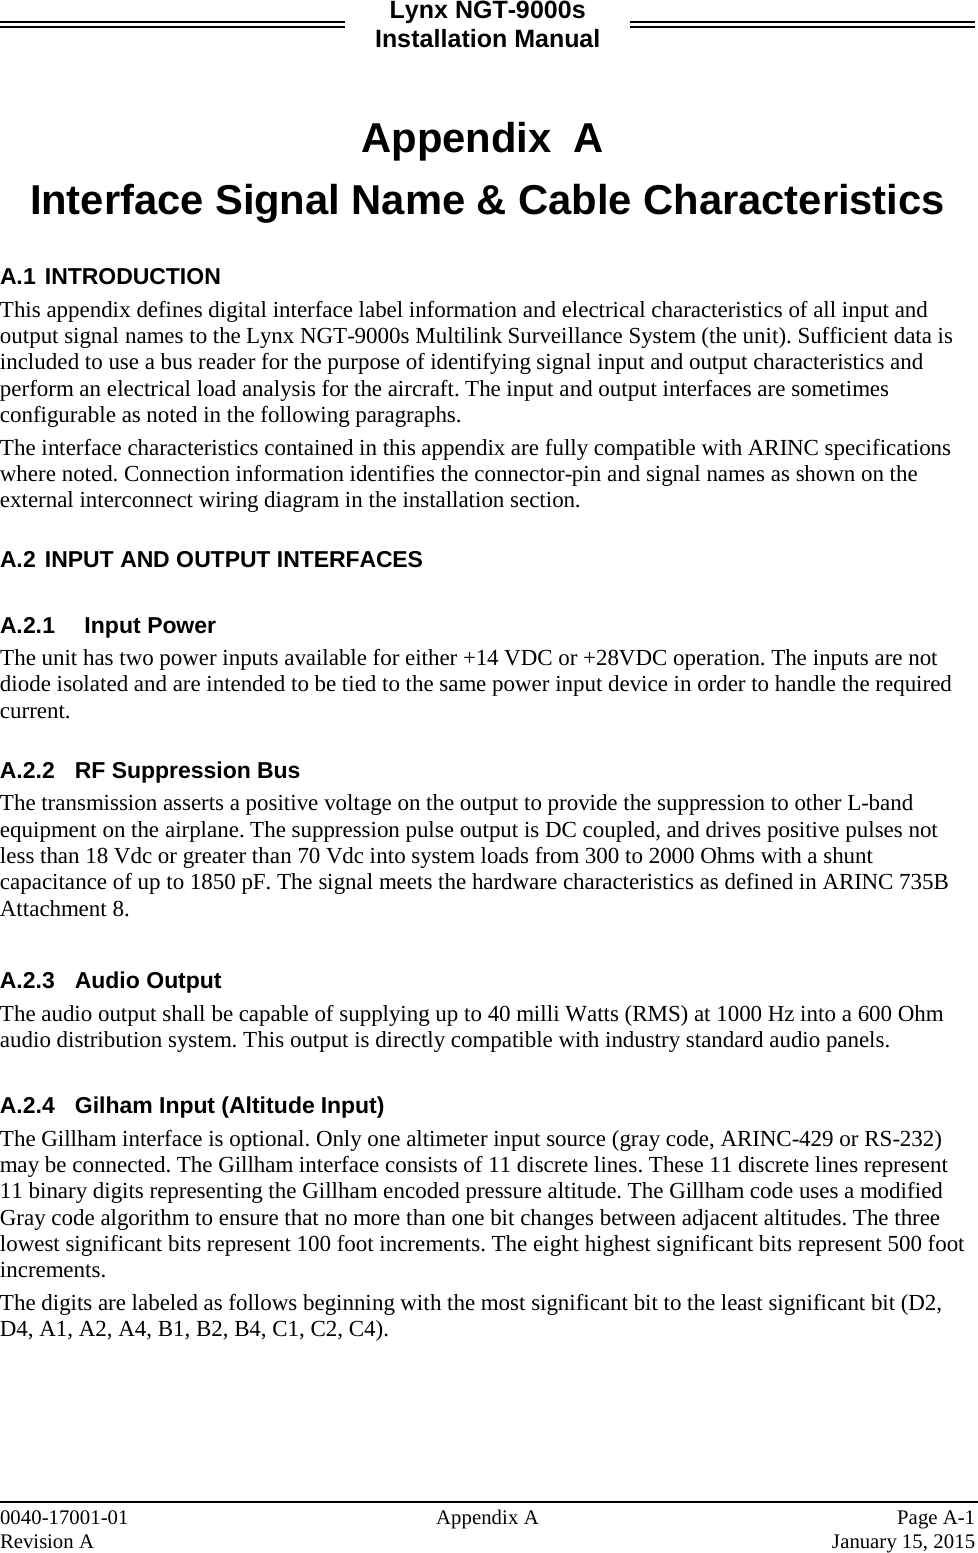 Lynx NGT-9000s Installation Manual   Appendix A Interface Signal Name &amp; Cable Characteristics  A.1 INTRODUCTION This appendix defines digital interface label information and electrical characteristics of all input and output signal names to the Lynx NGT-9000s Multilink Surveillance System (the unit). Sufficient data is included to use a bus reader for the purpose of identifying signal input and output characteristics and perform an electrical load analysis for the aircraft. The input and output interfaces are sometimes configurable as noted in the following paragraphs.  The interface characteristics contained in this appendix are fully compatible with ARINC specifications where noted. Connection information identifies the connector-pin and signal names as shown on the external interconnect wiring diagram in the installation section.   A.2 INPUT AND OUTPUT INTERFACES  A.2.1 Input Power The unit has two power inputs available for either +14 VDC or +28VDC operation. The inputs are not diode isolated and are intended to be tied to the same power input device in order to handle the required current.   A.2.2 RF Suppression Bus The transmission asserts a positive voltage on the output to provide the suppression to other L-band equipment on the airplane. The suppression pulse output is DC coupled, and drives positive pulses not less than 18 Vdc or greater than 70 Vdc into system loads from 300 to 2000 Ohms with a shunt capacitance of up to 1850 pF. The signal meets the hardware characteristics as defined in ARINC 735B Attachment 8.  A.2.3 Audio Output The audio output shall be capable of supplying up to 40 milli Watts (RMS) at 1000 Hz into a 600 Ohm audio distribution system. This output is directly compatible with industry standard audio panels.  A.2.4 Gilham Input (Altitude Input) The Gillham interface is optional. Only one altimeter input source (gray code, ARINC-429 or RS-232) may be connected. The Gillham interface consists of 11 discrete lines. These 11 discrete lines represent 11 binary digits representing the Gillham encoded pressure altitude. The Gillham code uses a modified Gray code algorithm to ensure that no more than one bit changes between adjacent altitudes. The three lowest significant bits represent 100 foot increments. The eight highest significant bits represent 500 foot increments. The digits are labeled as follows beginning with the most significant bit to the least significant bit (D2, D4, A1, A2, A4, B1, B2, B4, C1, C2, C4).     0040-17001-01    Appendix A Page A-1 Revision A    January 15, 2015 